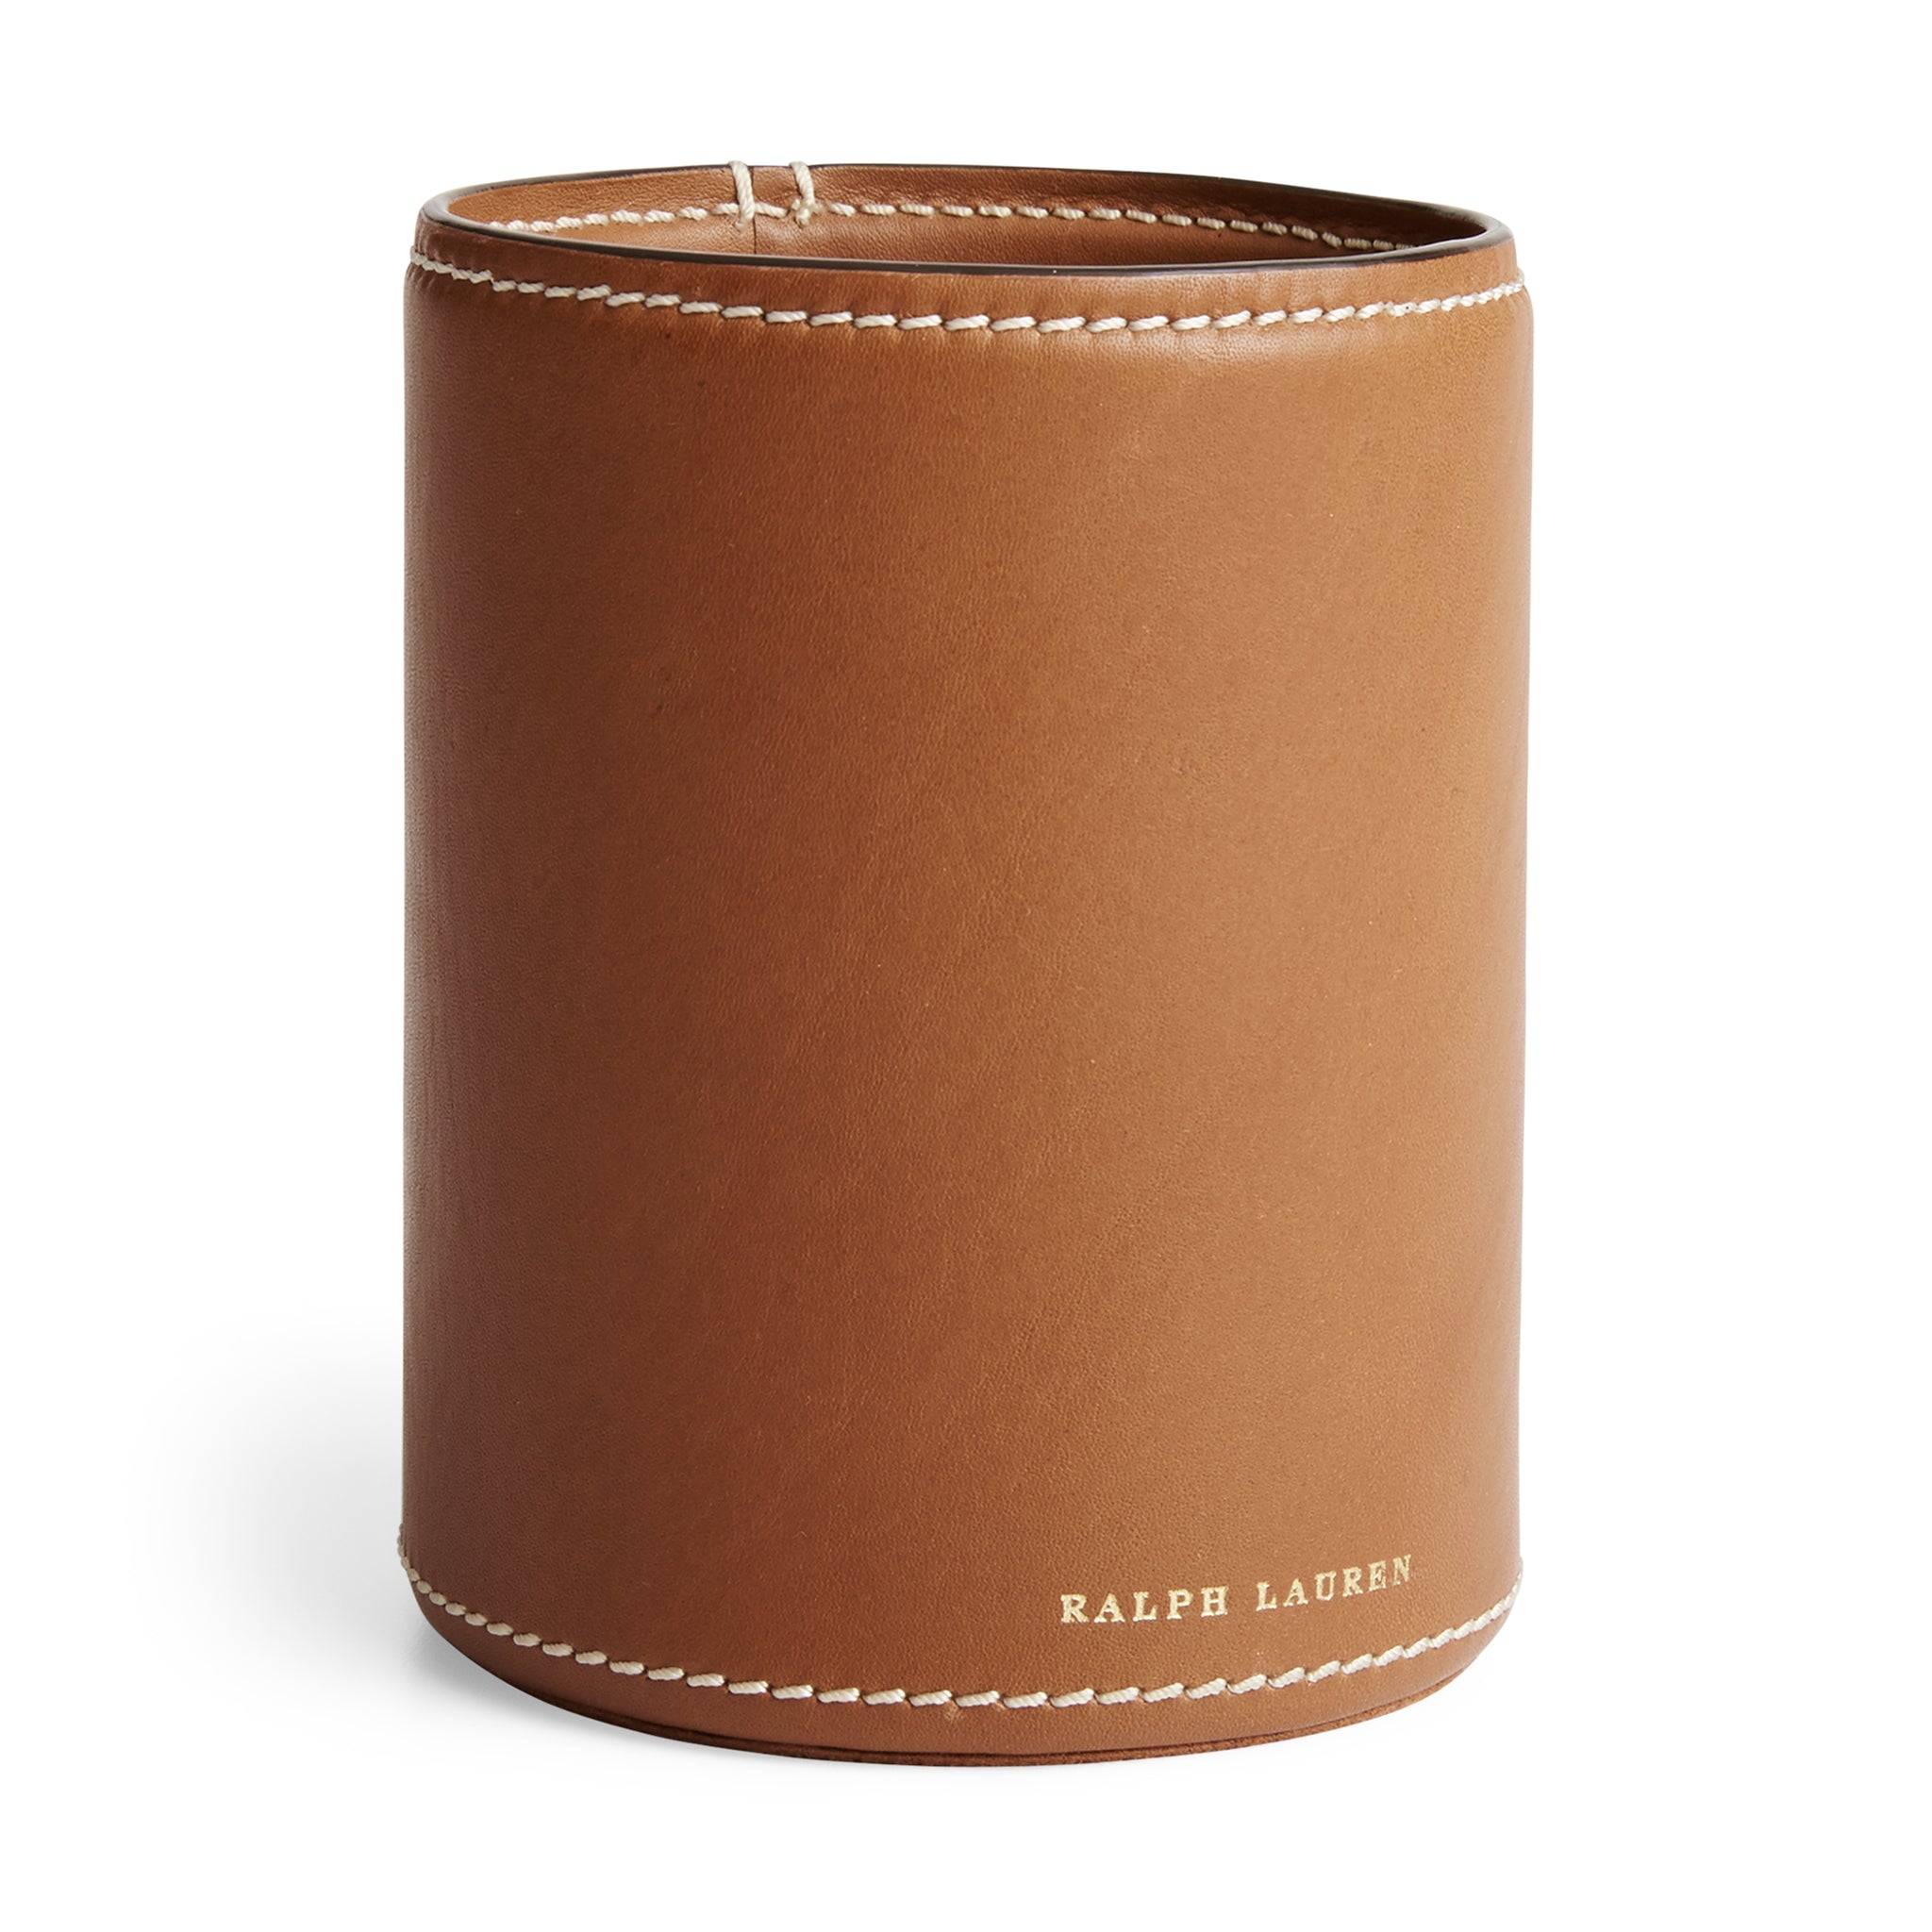 ralph lauren brennan pencil holder in leather - saddle home accessories 